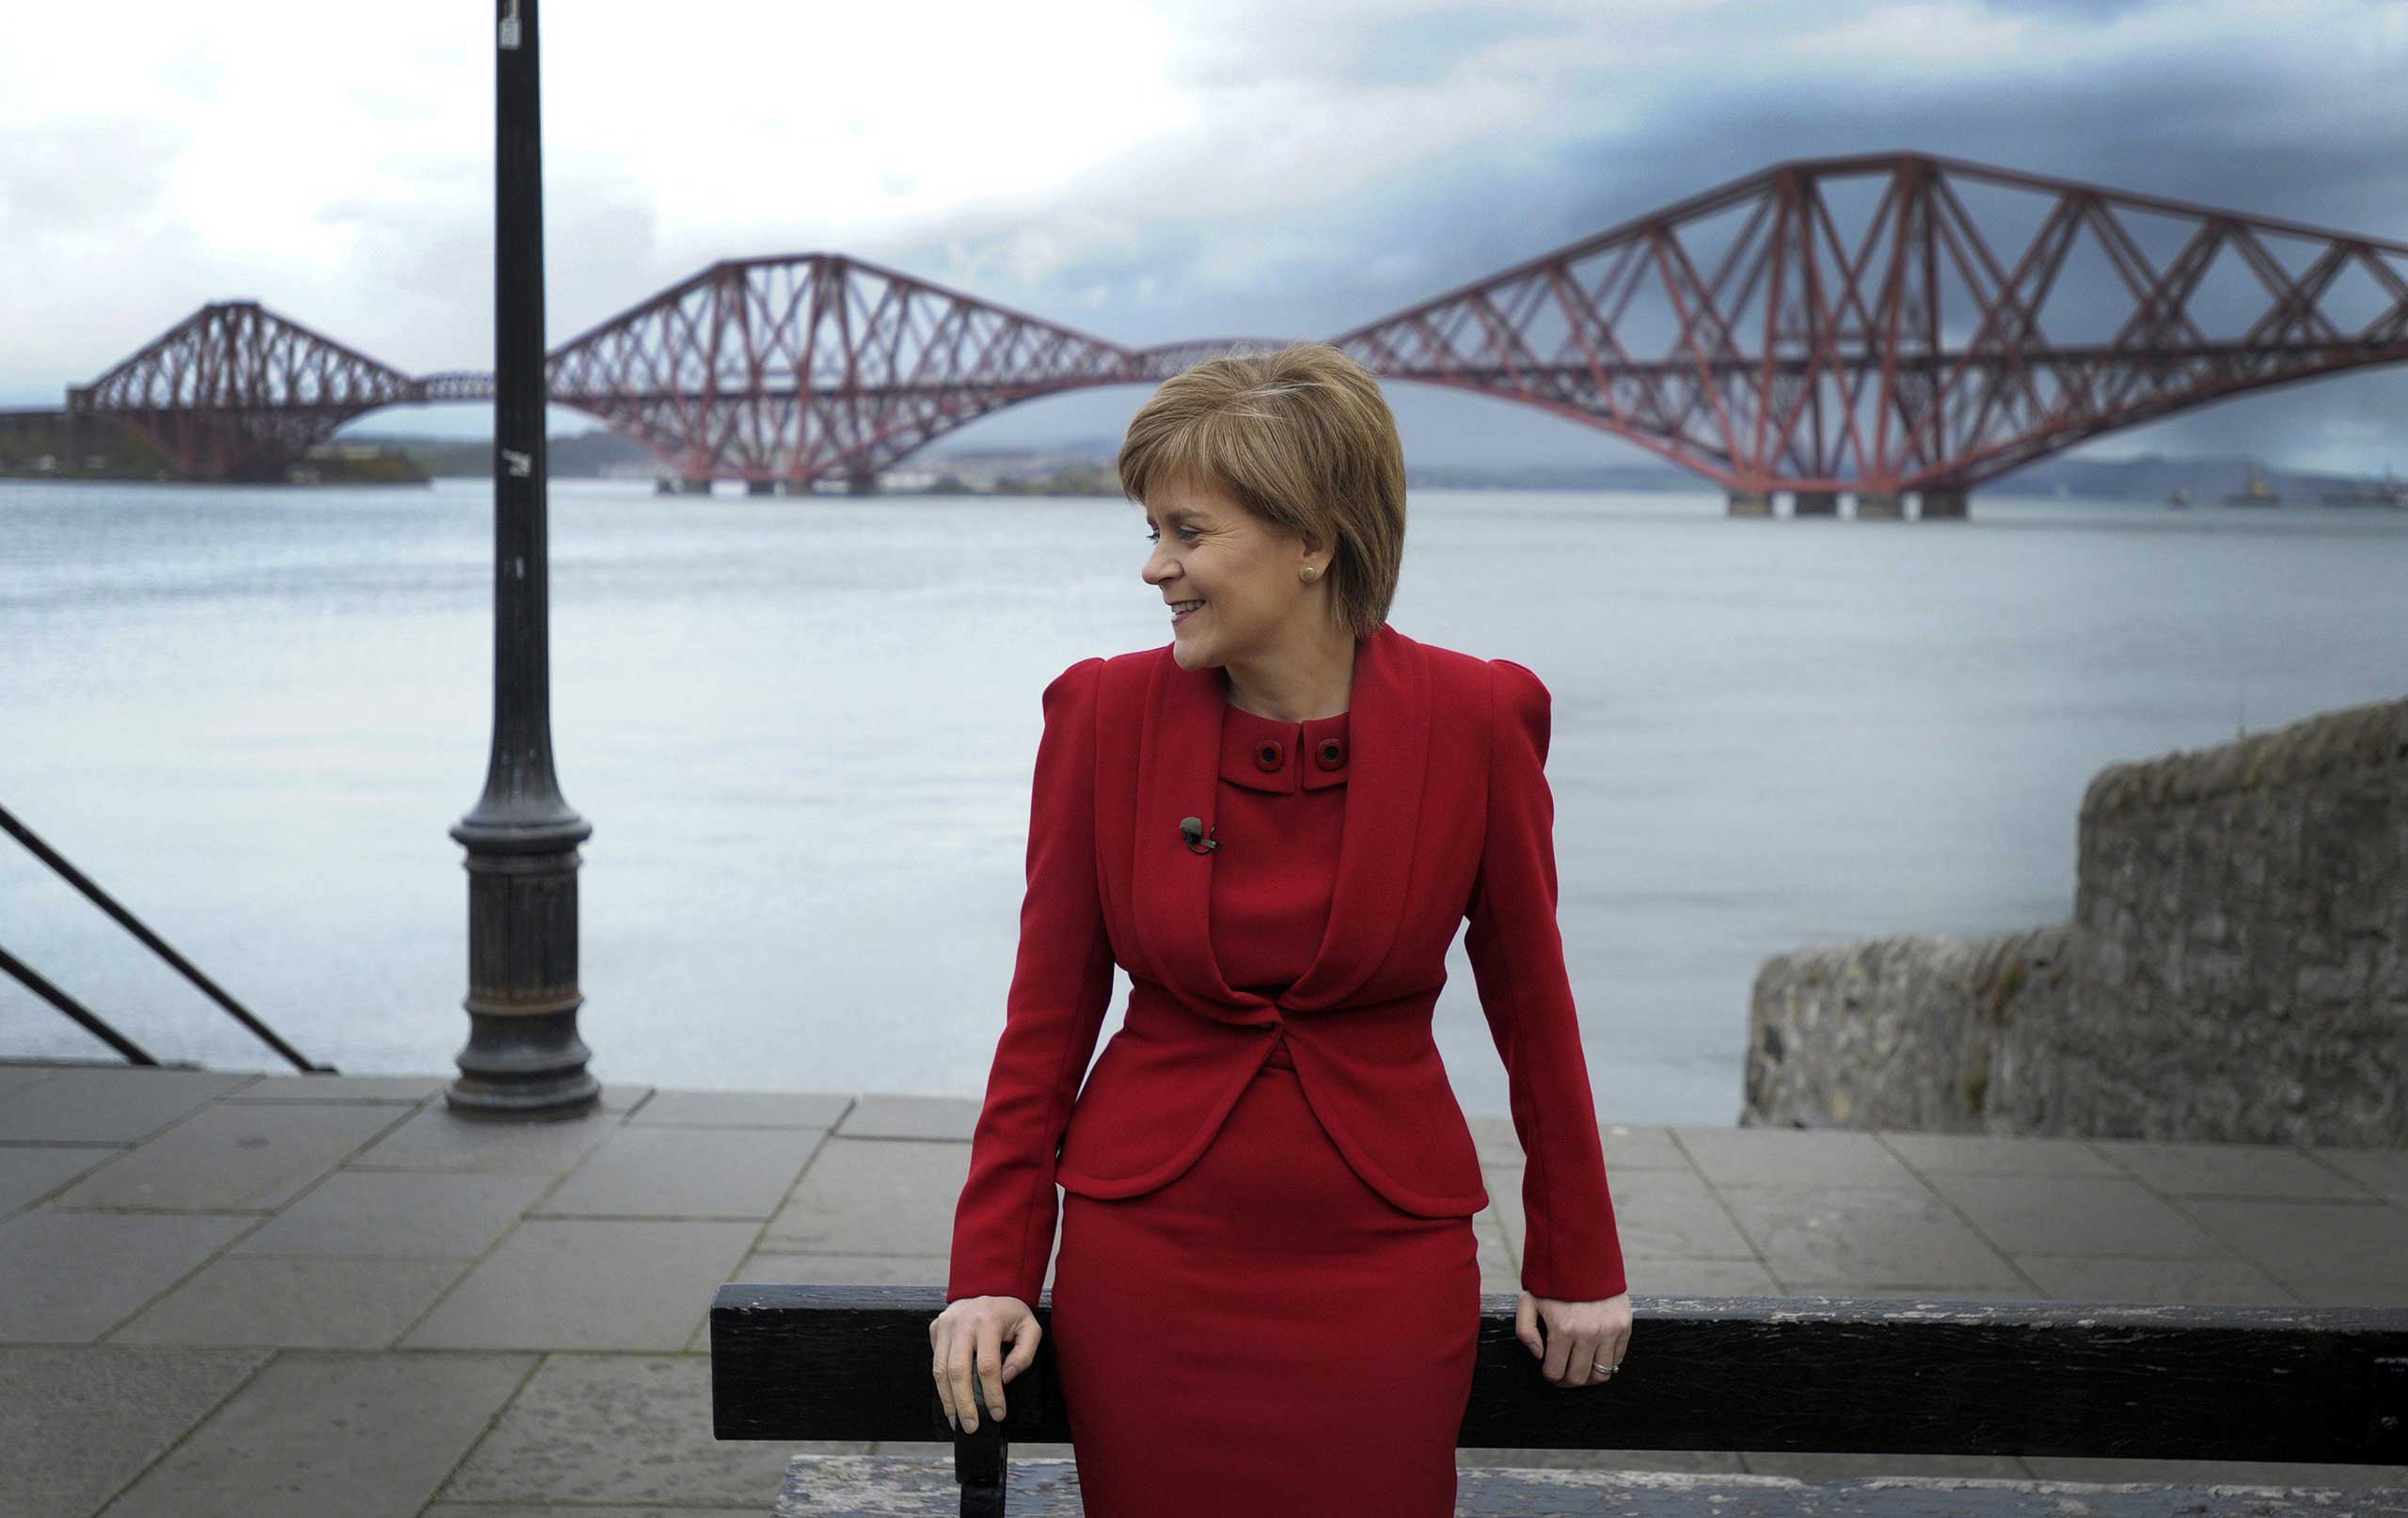 First Minister of Scotland and leader of the Scottish National Party Nicola Sturgeon campaigns in South Queensferry on the outskirts of Edinburgh on April 28, 2015. (Andy Buchanan—AFP/Getty Images)